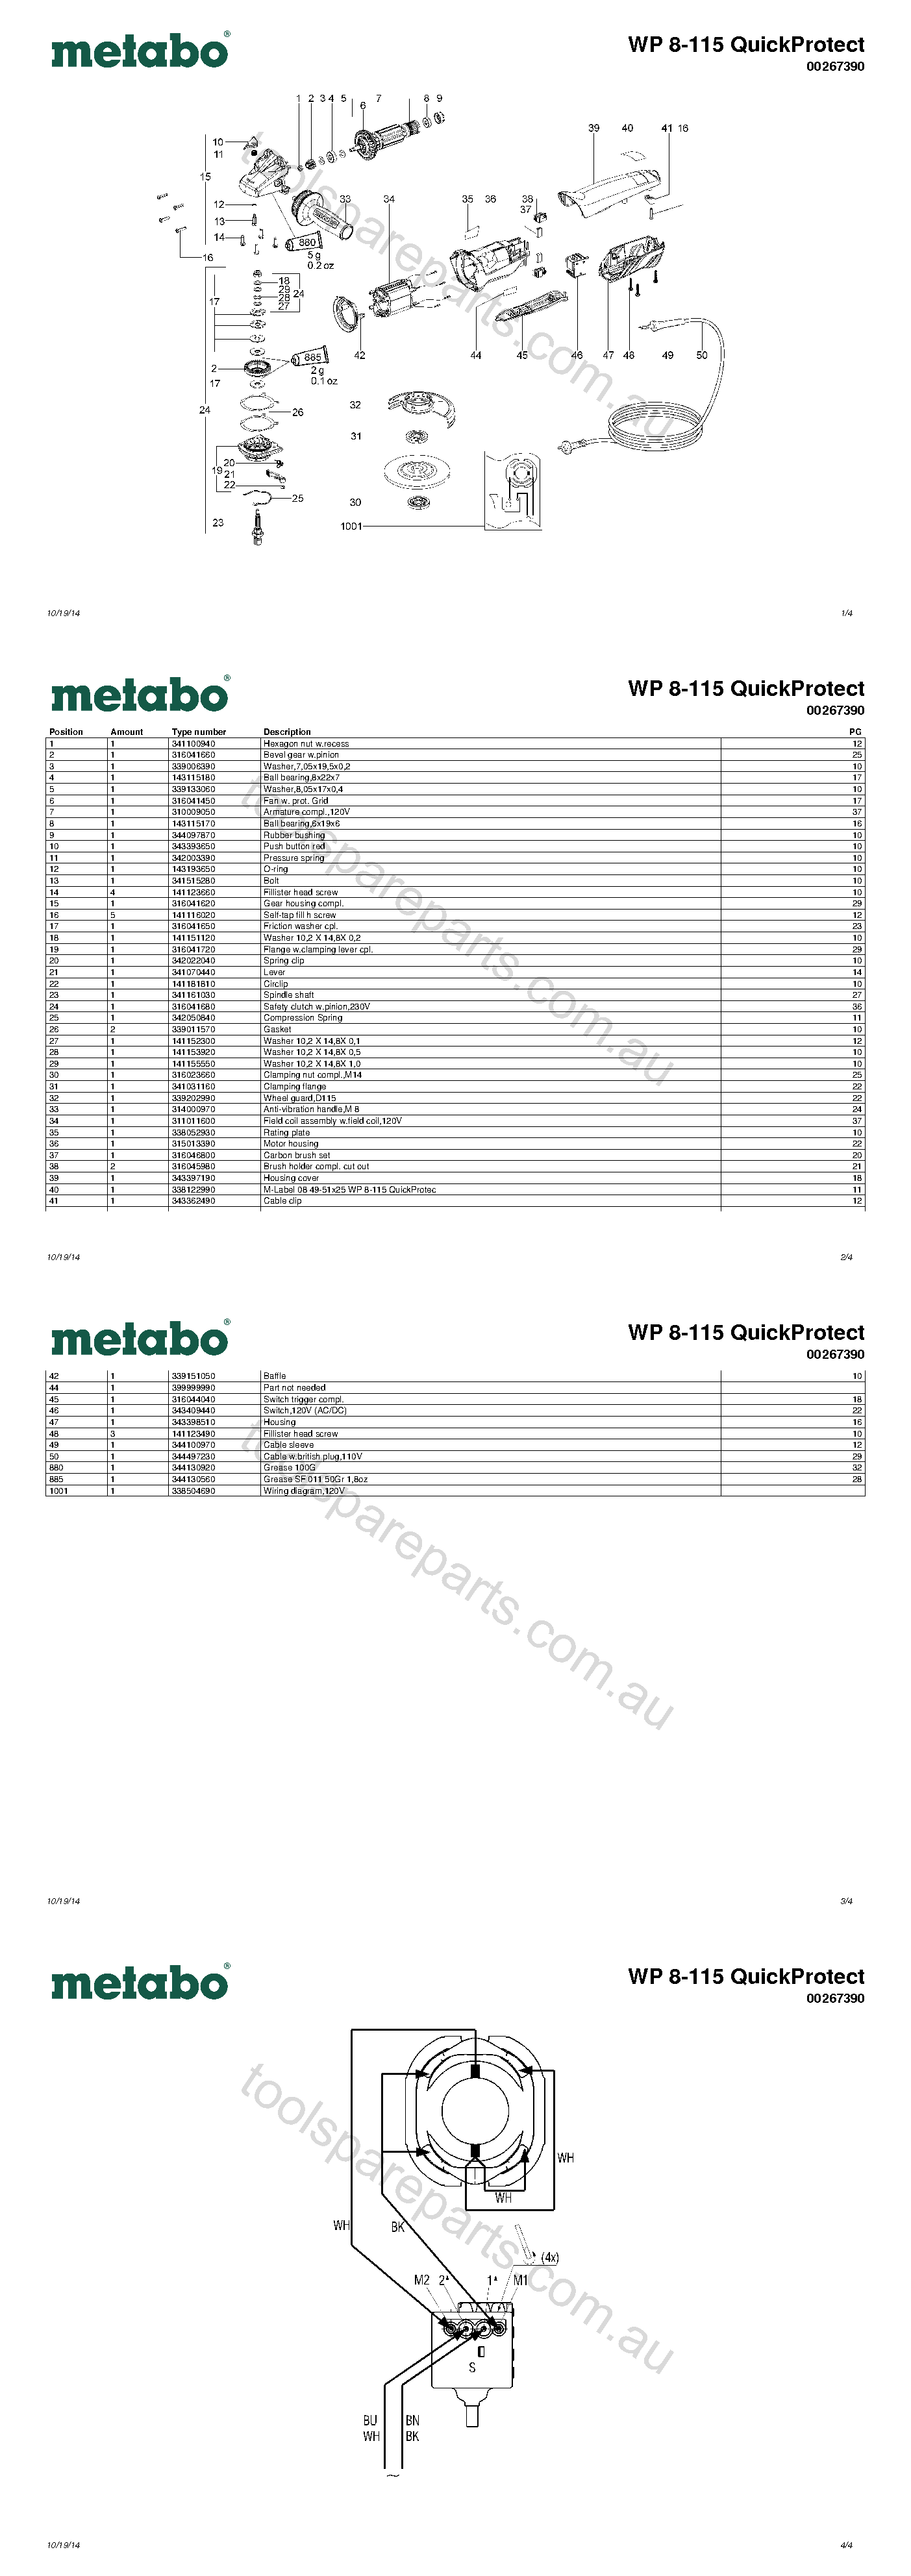 Metabo WP 8-115 QuickProtect 00267390  Diagram 1